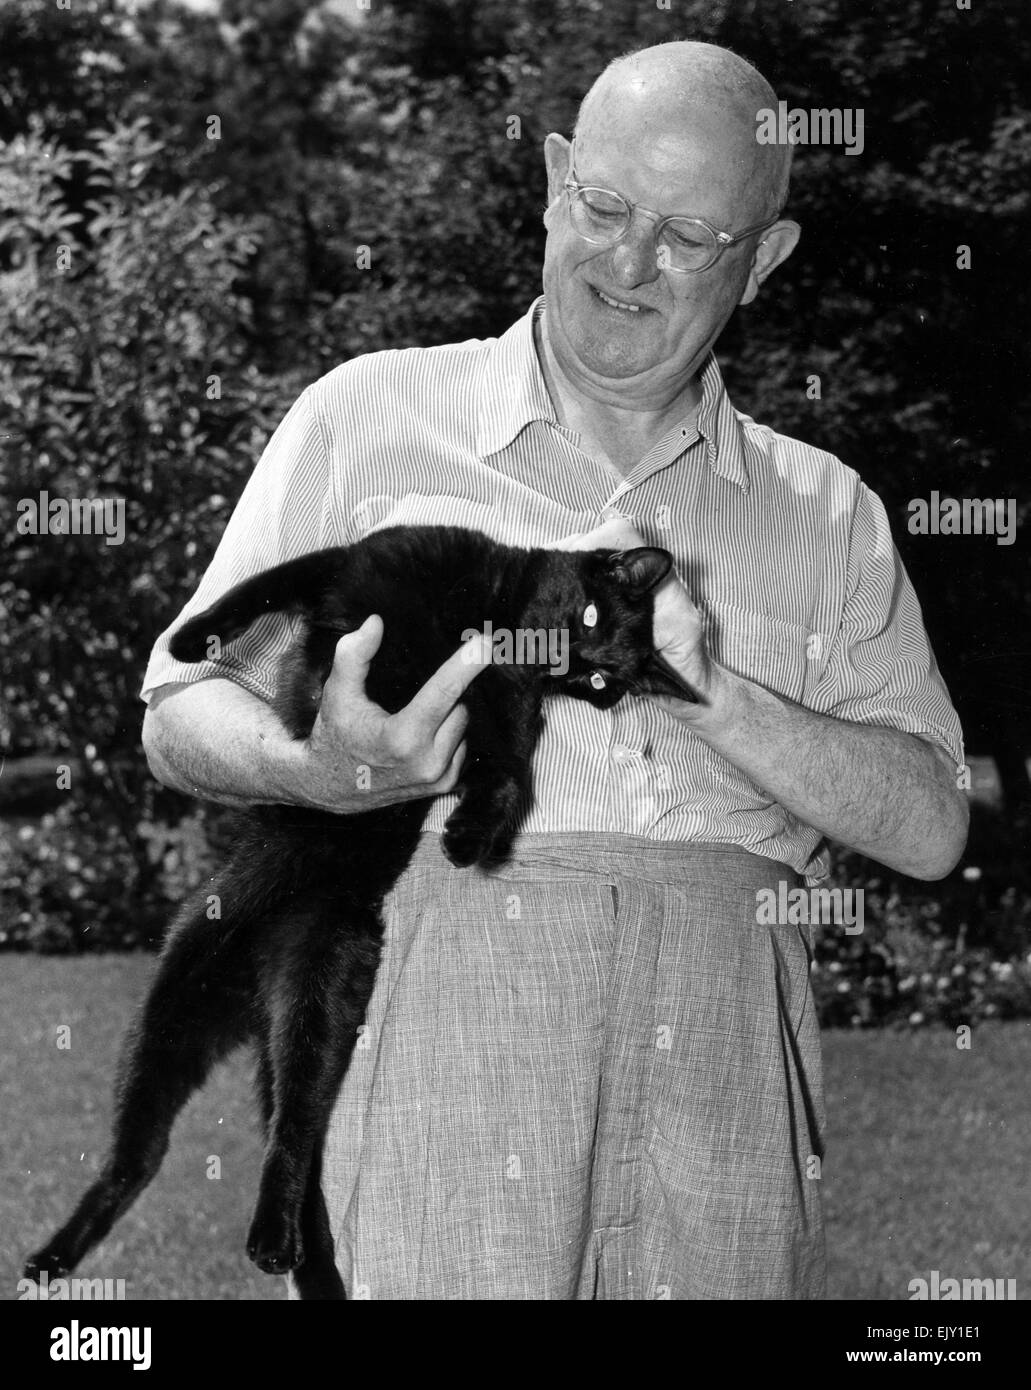 P.G.WODEHOUSE (1881-1975) English humourist  with his cat Blackie at his home in Basket Neck Lane, Remsenburg, New York, about 1956. Photo Graphic House 6640J Stock Photo